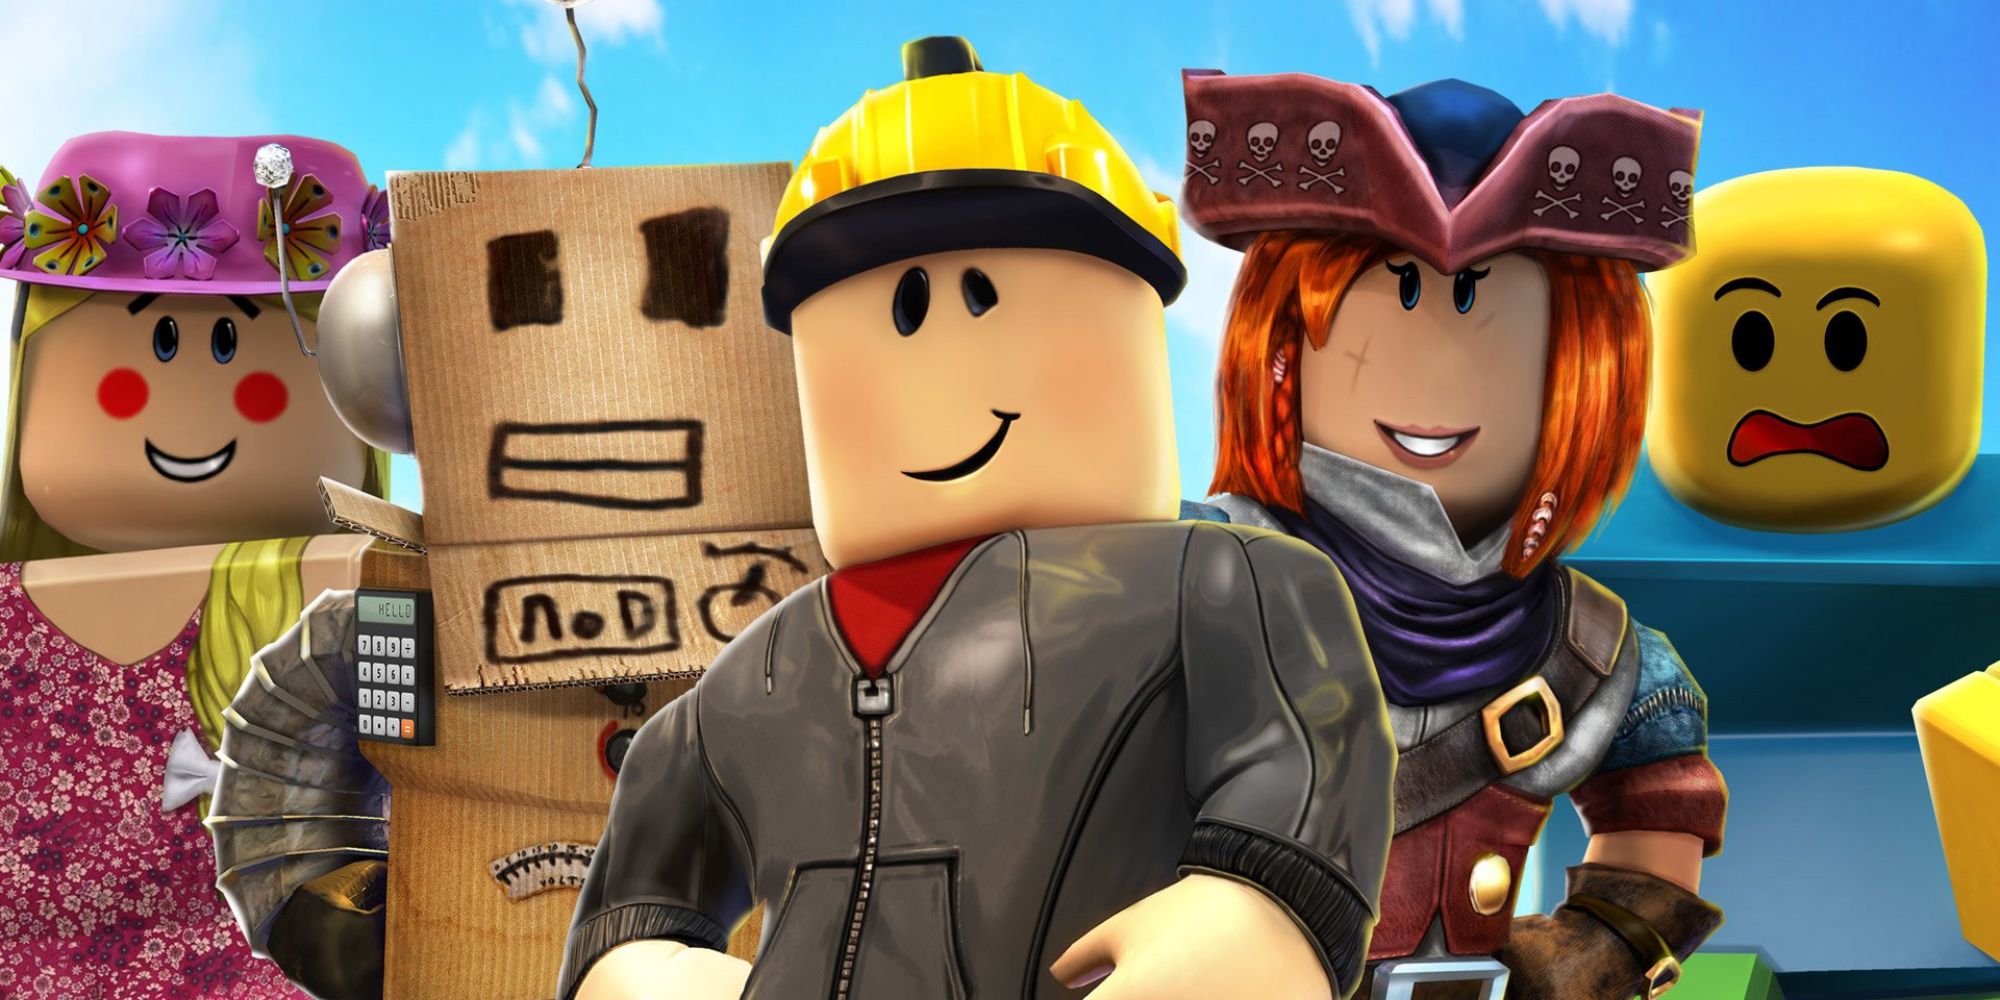 Roblox Players Must Now Pay to Hear 'Oof' Sound Effect - KeenGamer